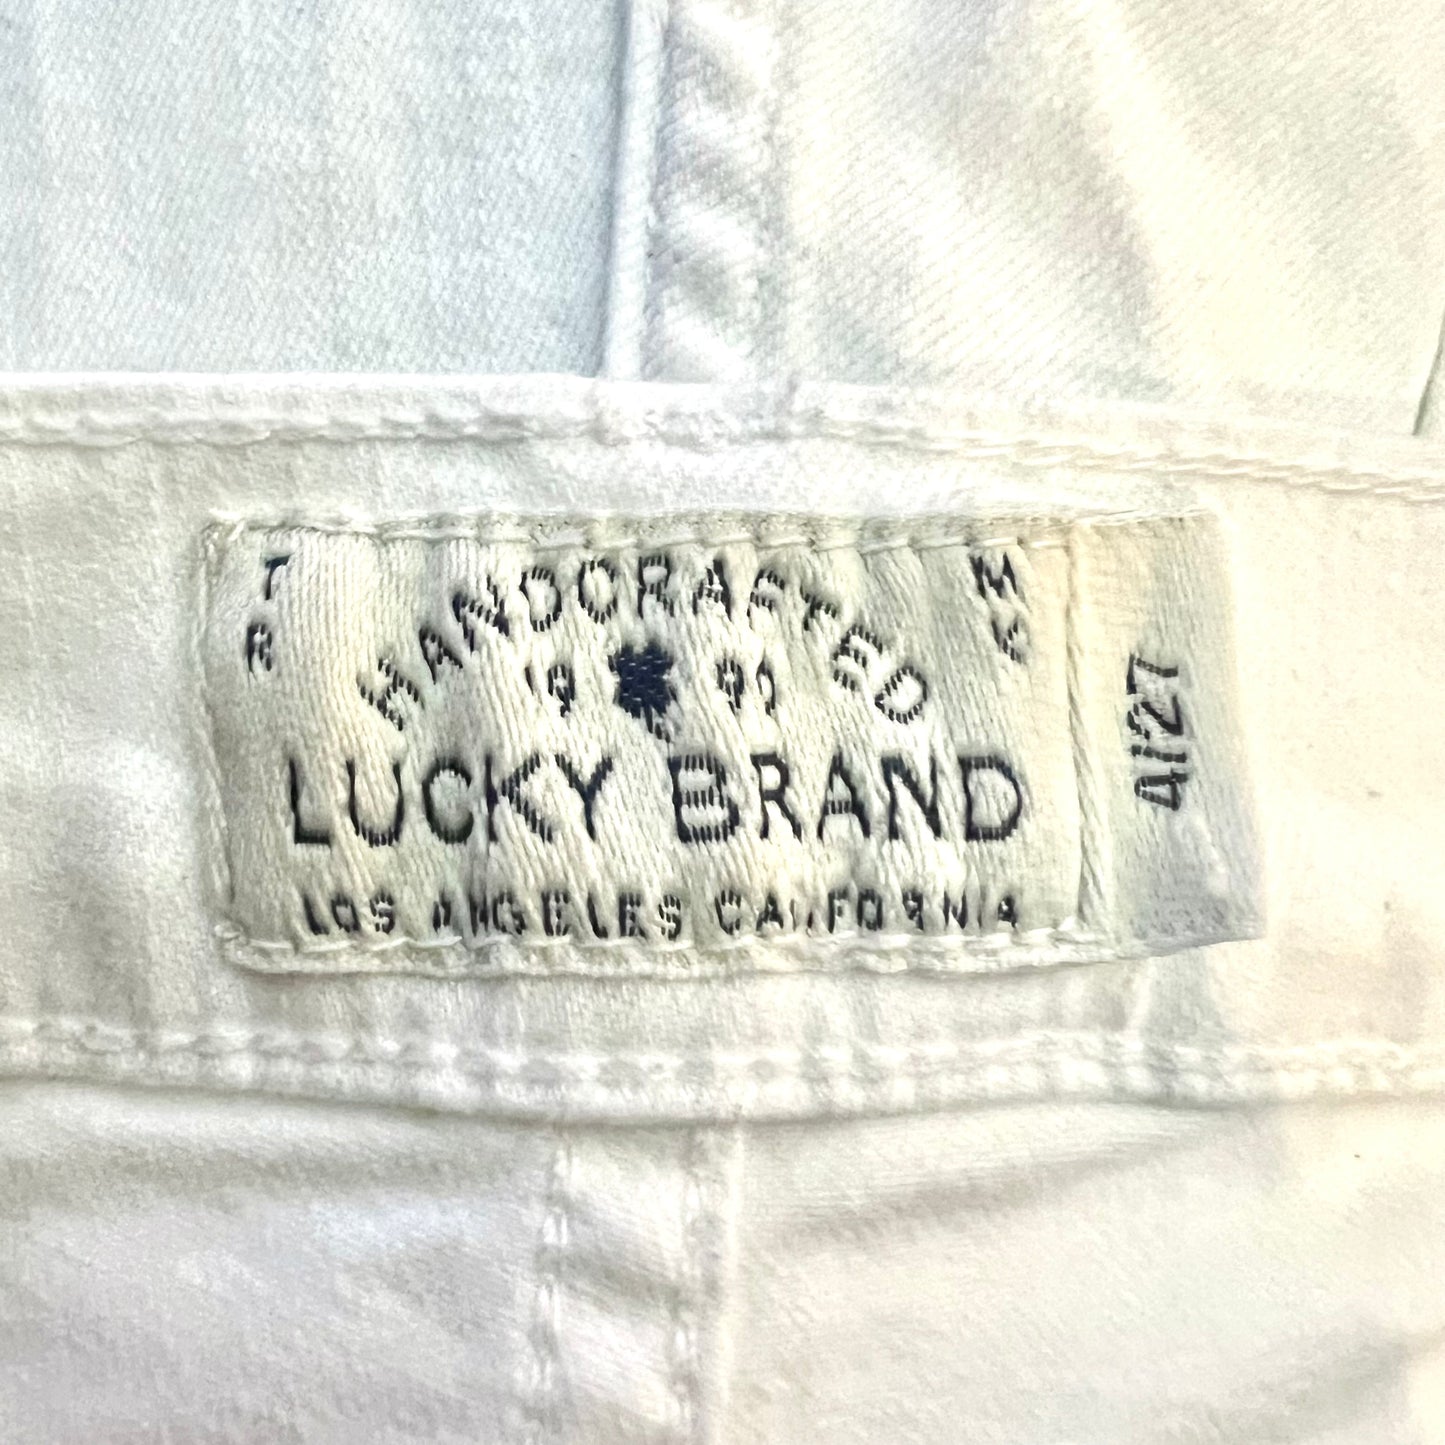 Jeans Flared By Lucky Brand  Size: 4